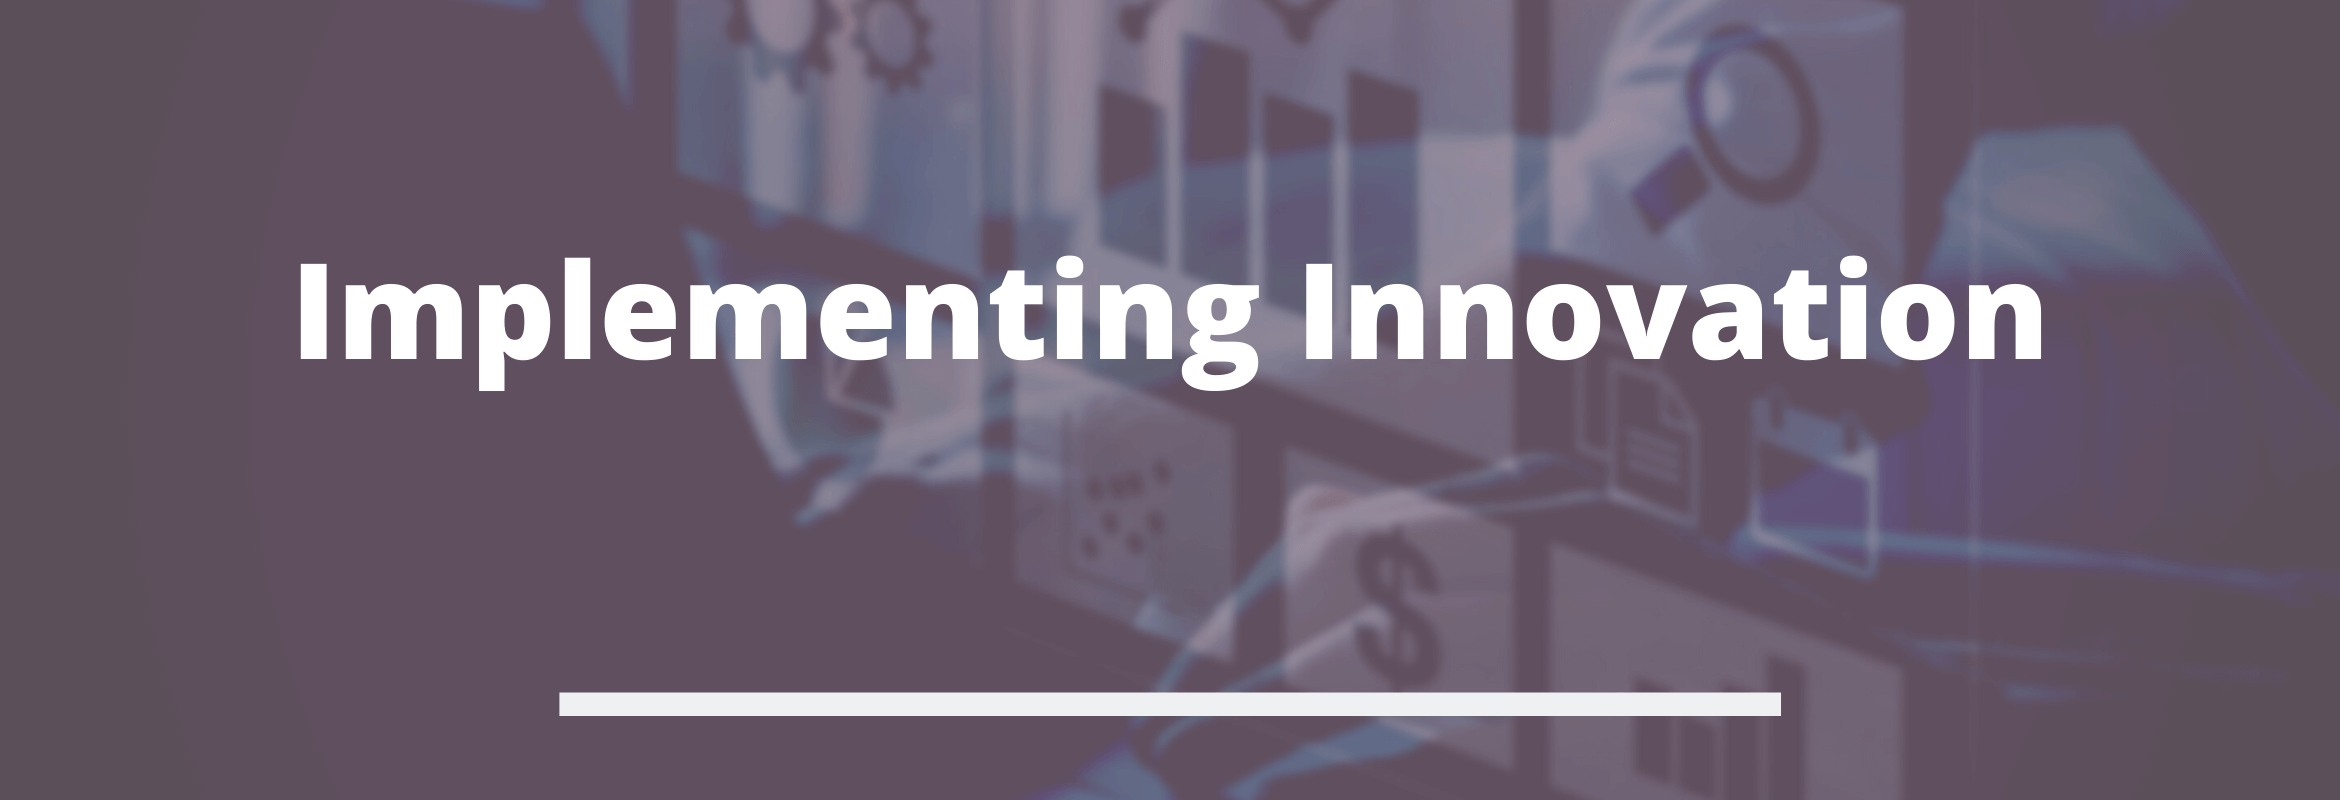 Implementing Innovation | sig.org